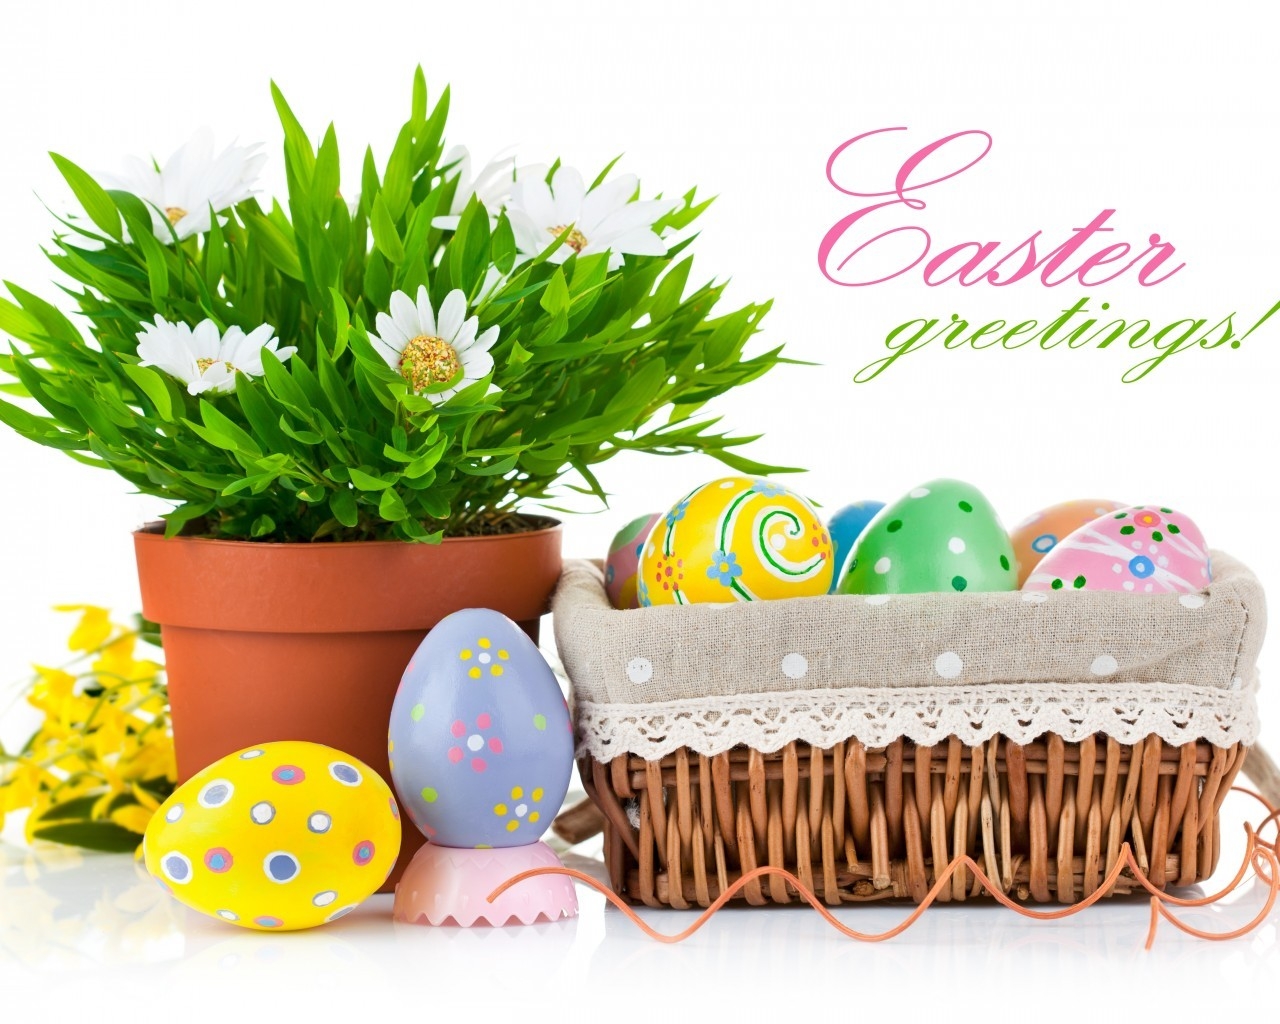 Easter Greetings for 1280 x 1024 resolution